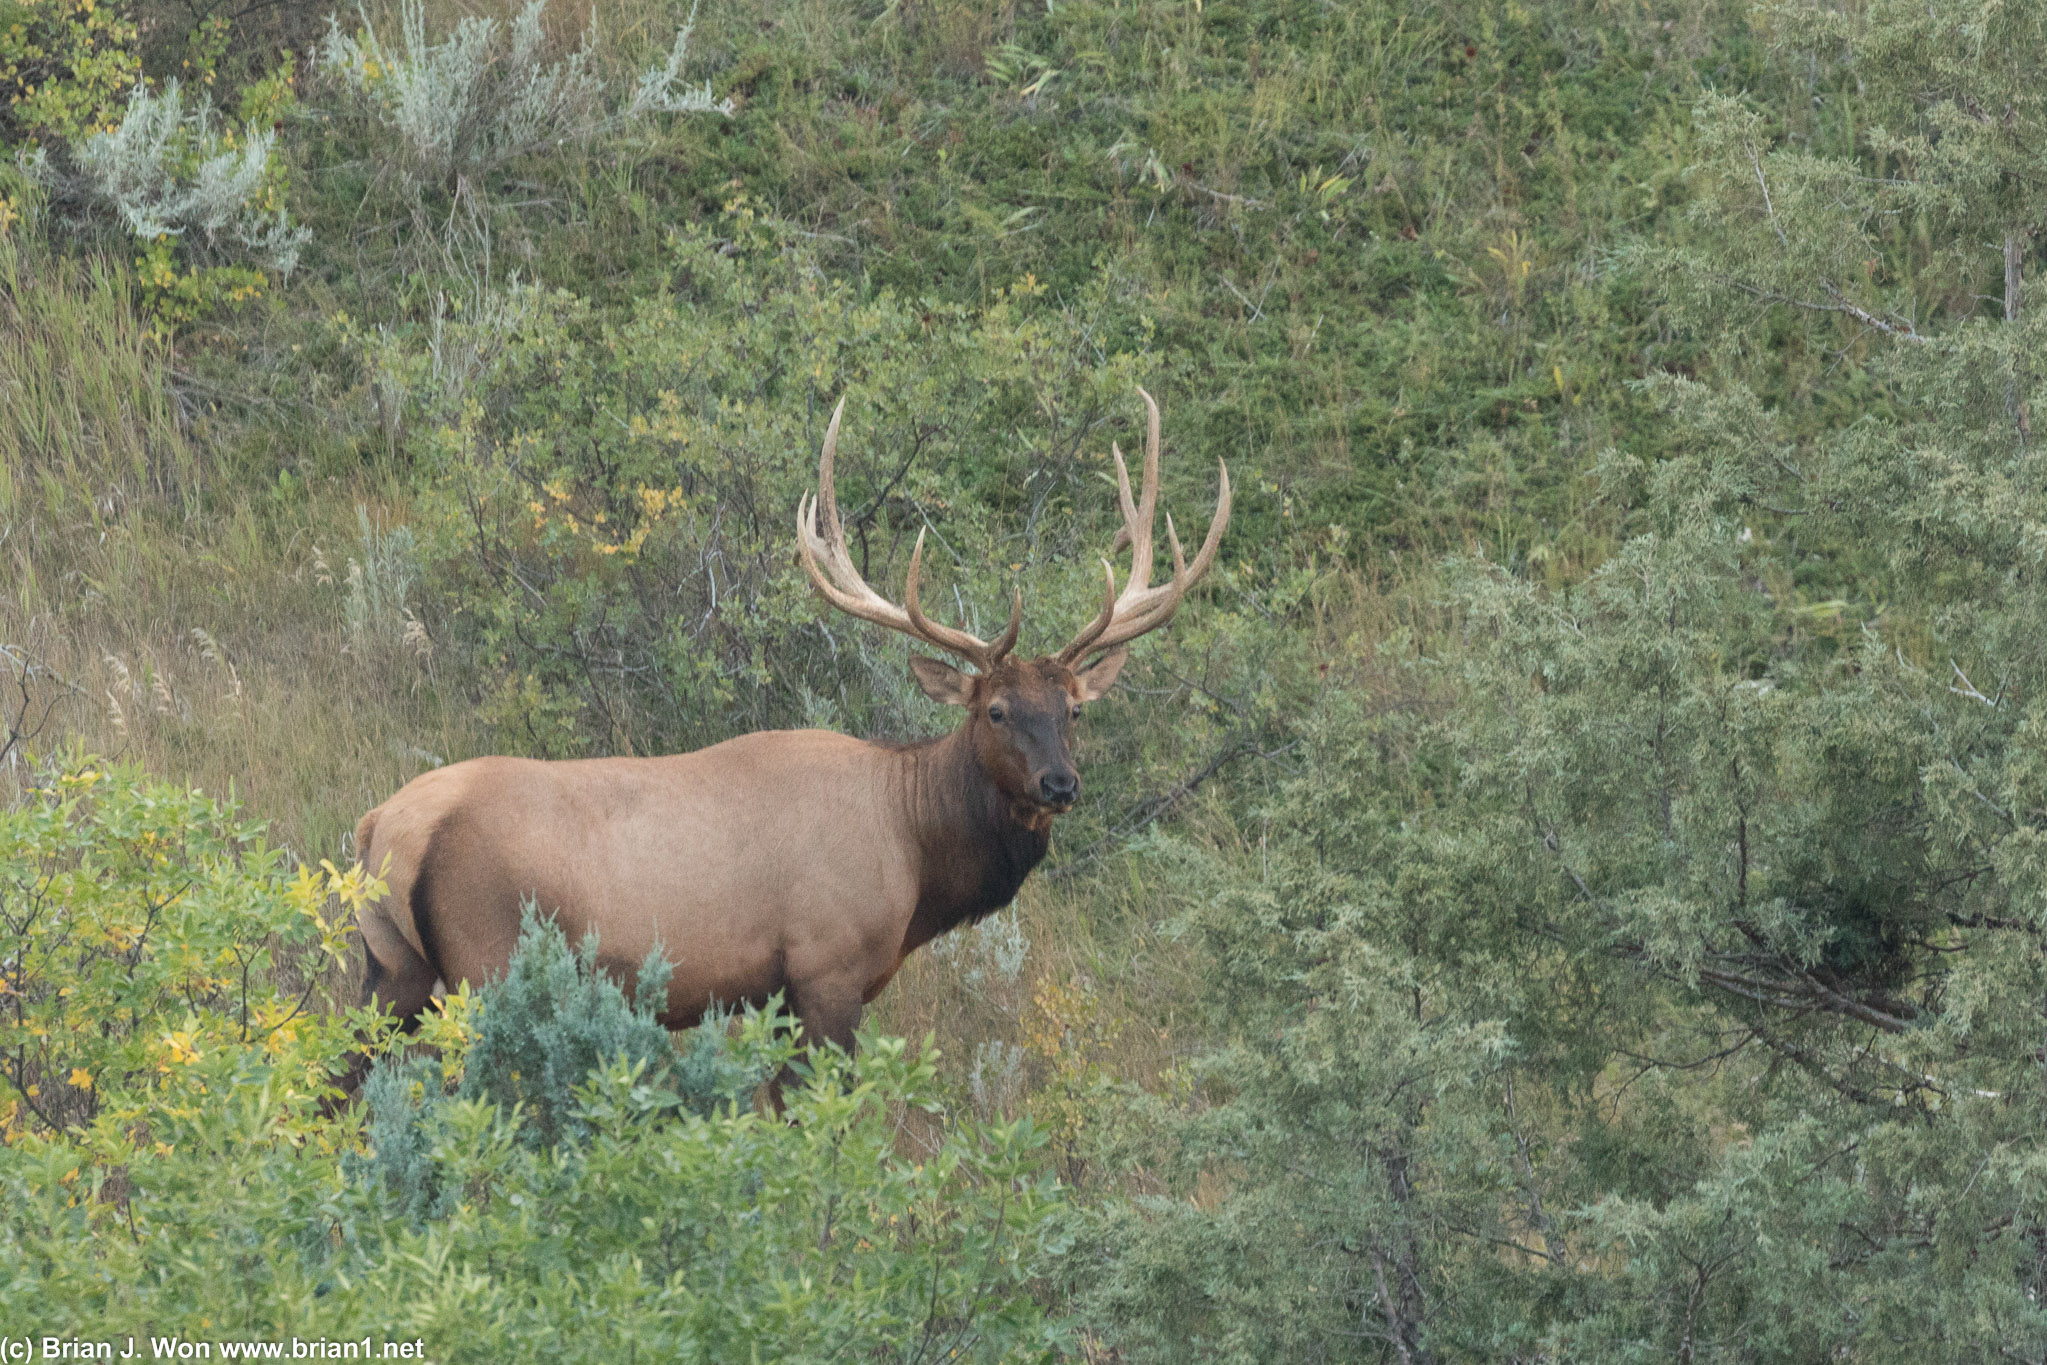 That is one magnificent mule deer.